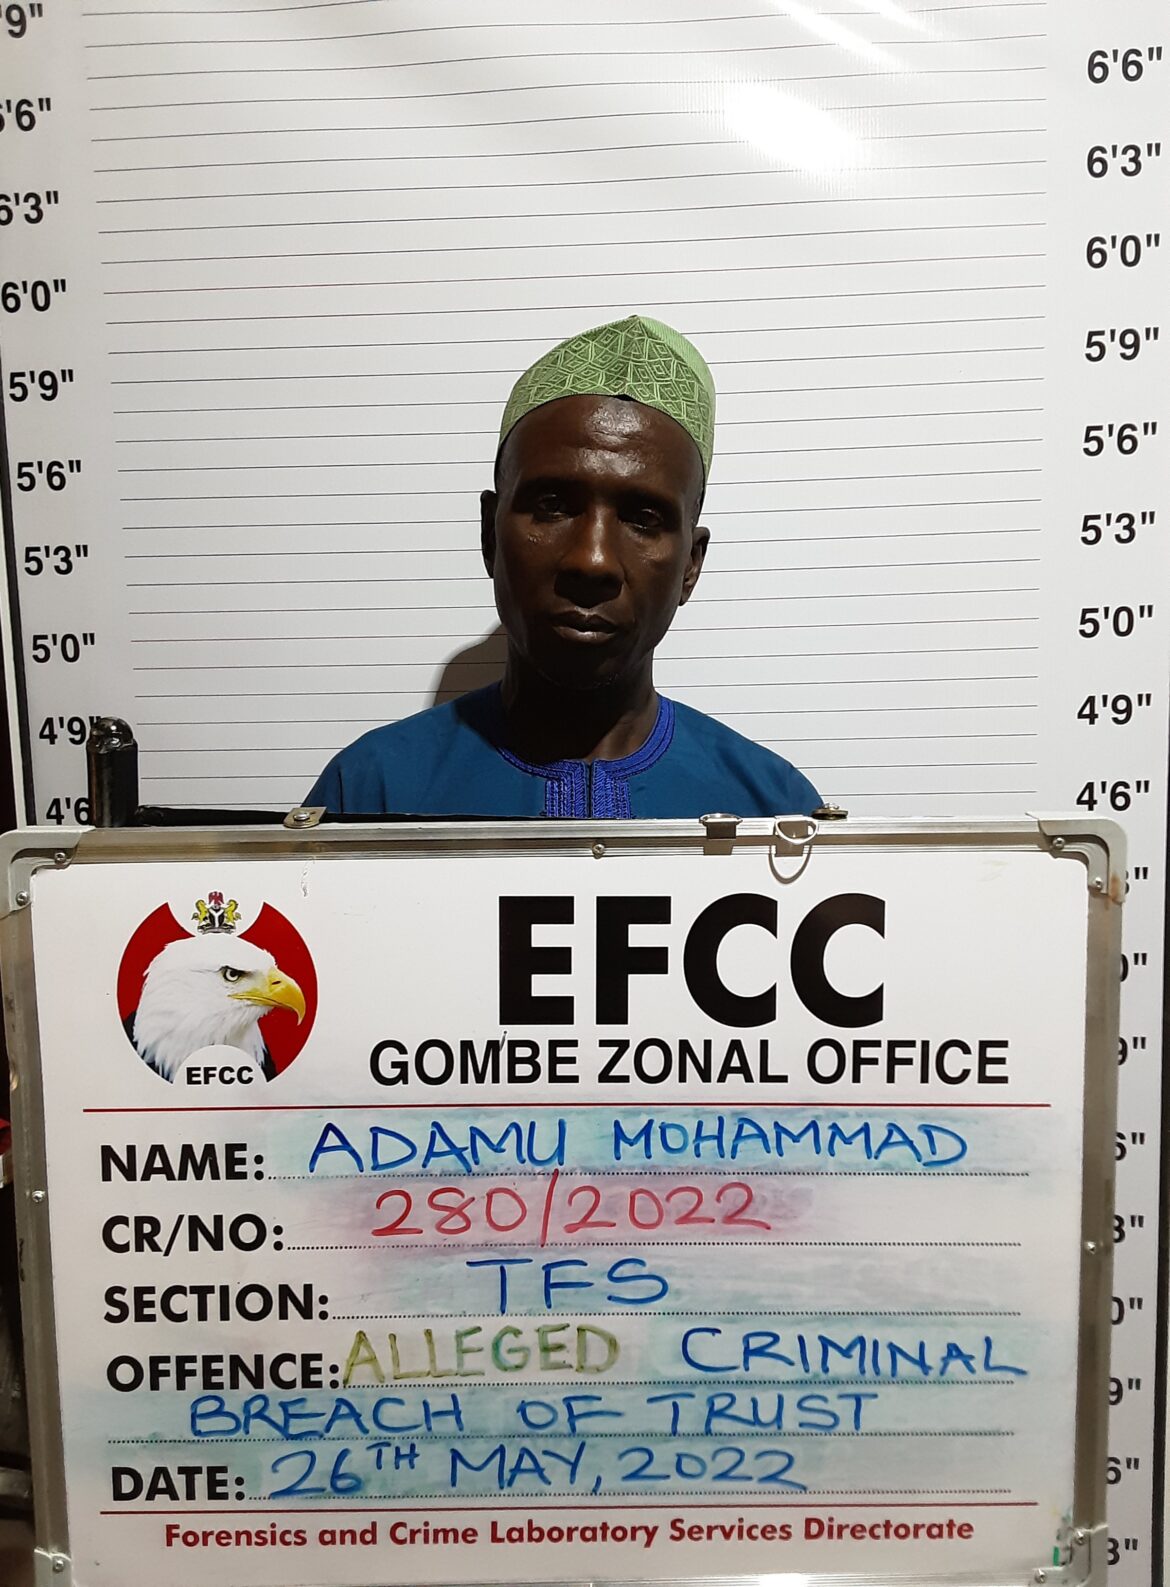 EFCC arraigns two for N10.6m fraud in Gombe